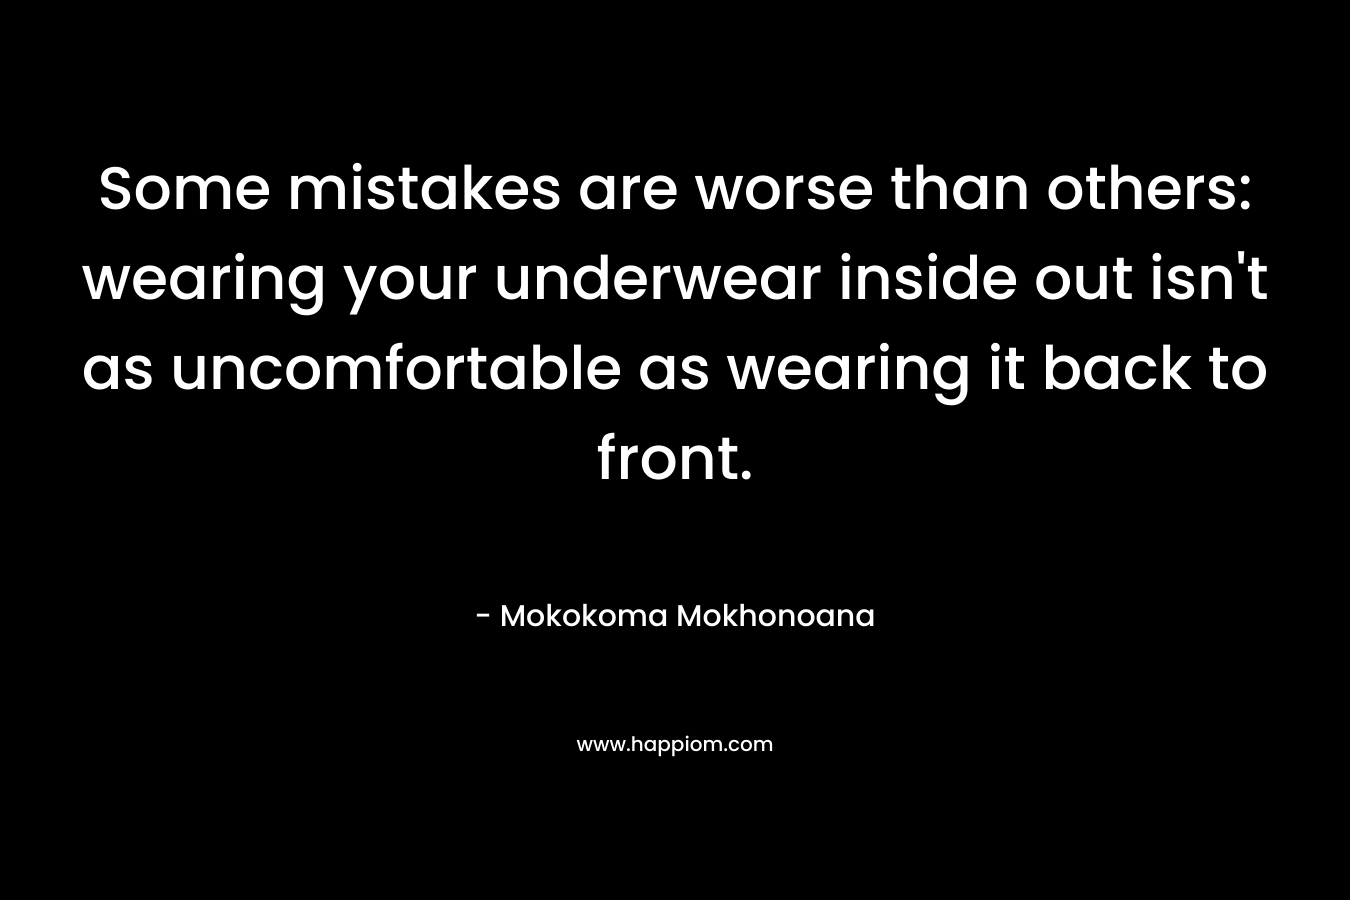 Some mistakes are worse than others: wearing your underwear inside out isn’t as uncomfortable as wearing it back to front. – Mokokoma Mokhonoana